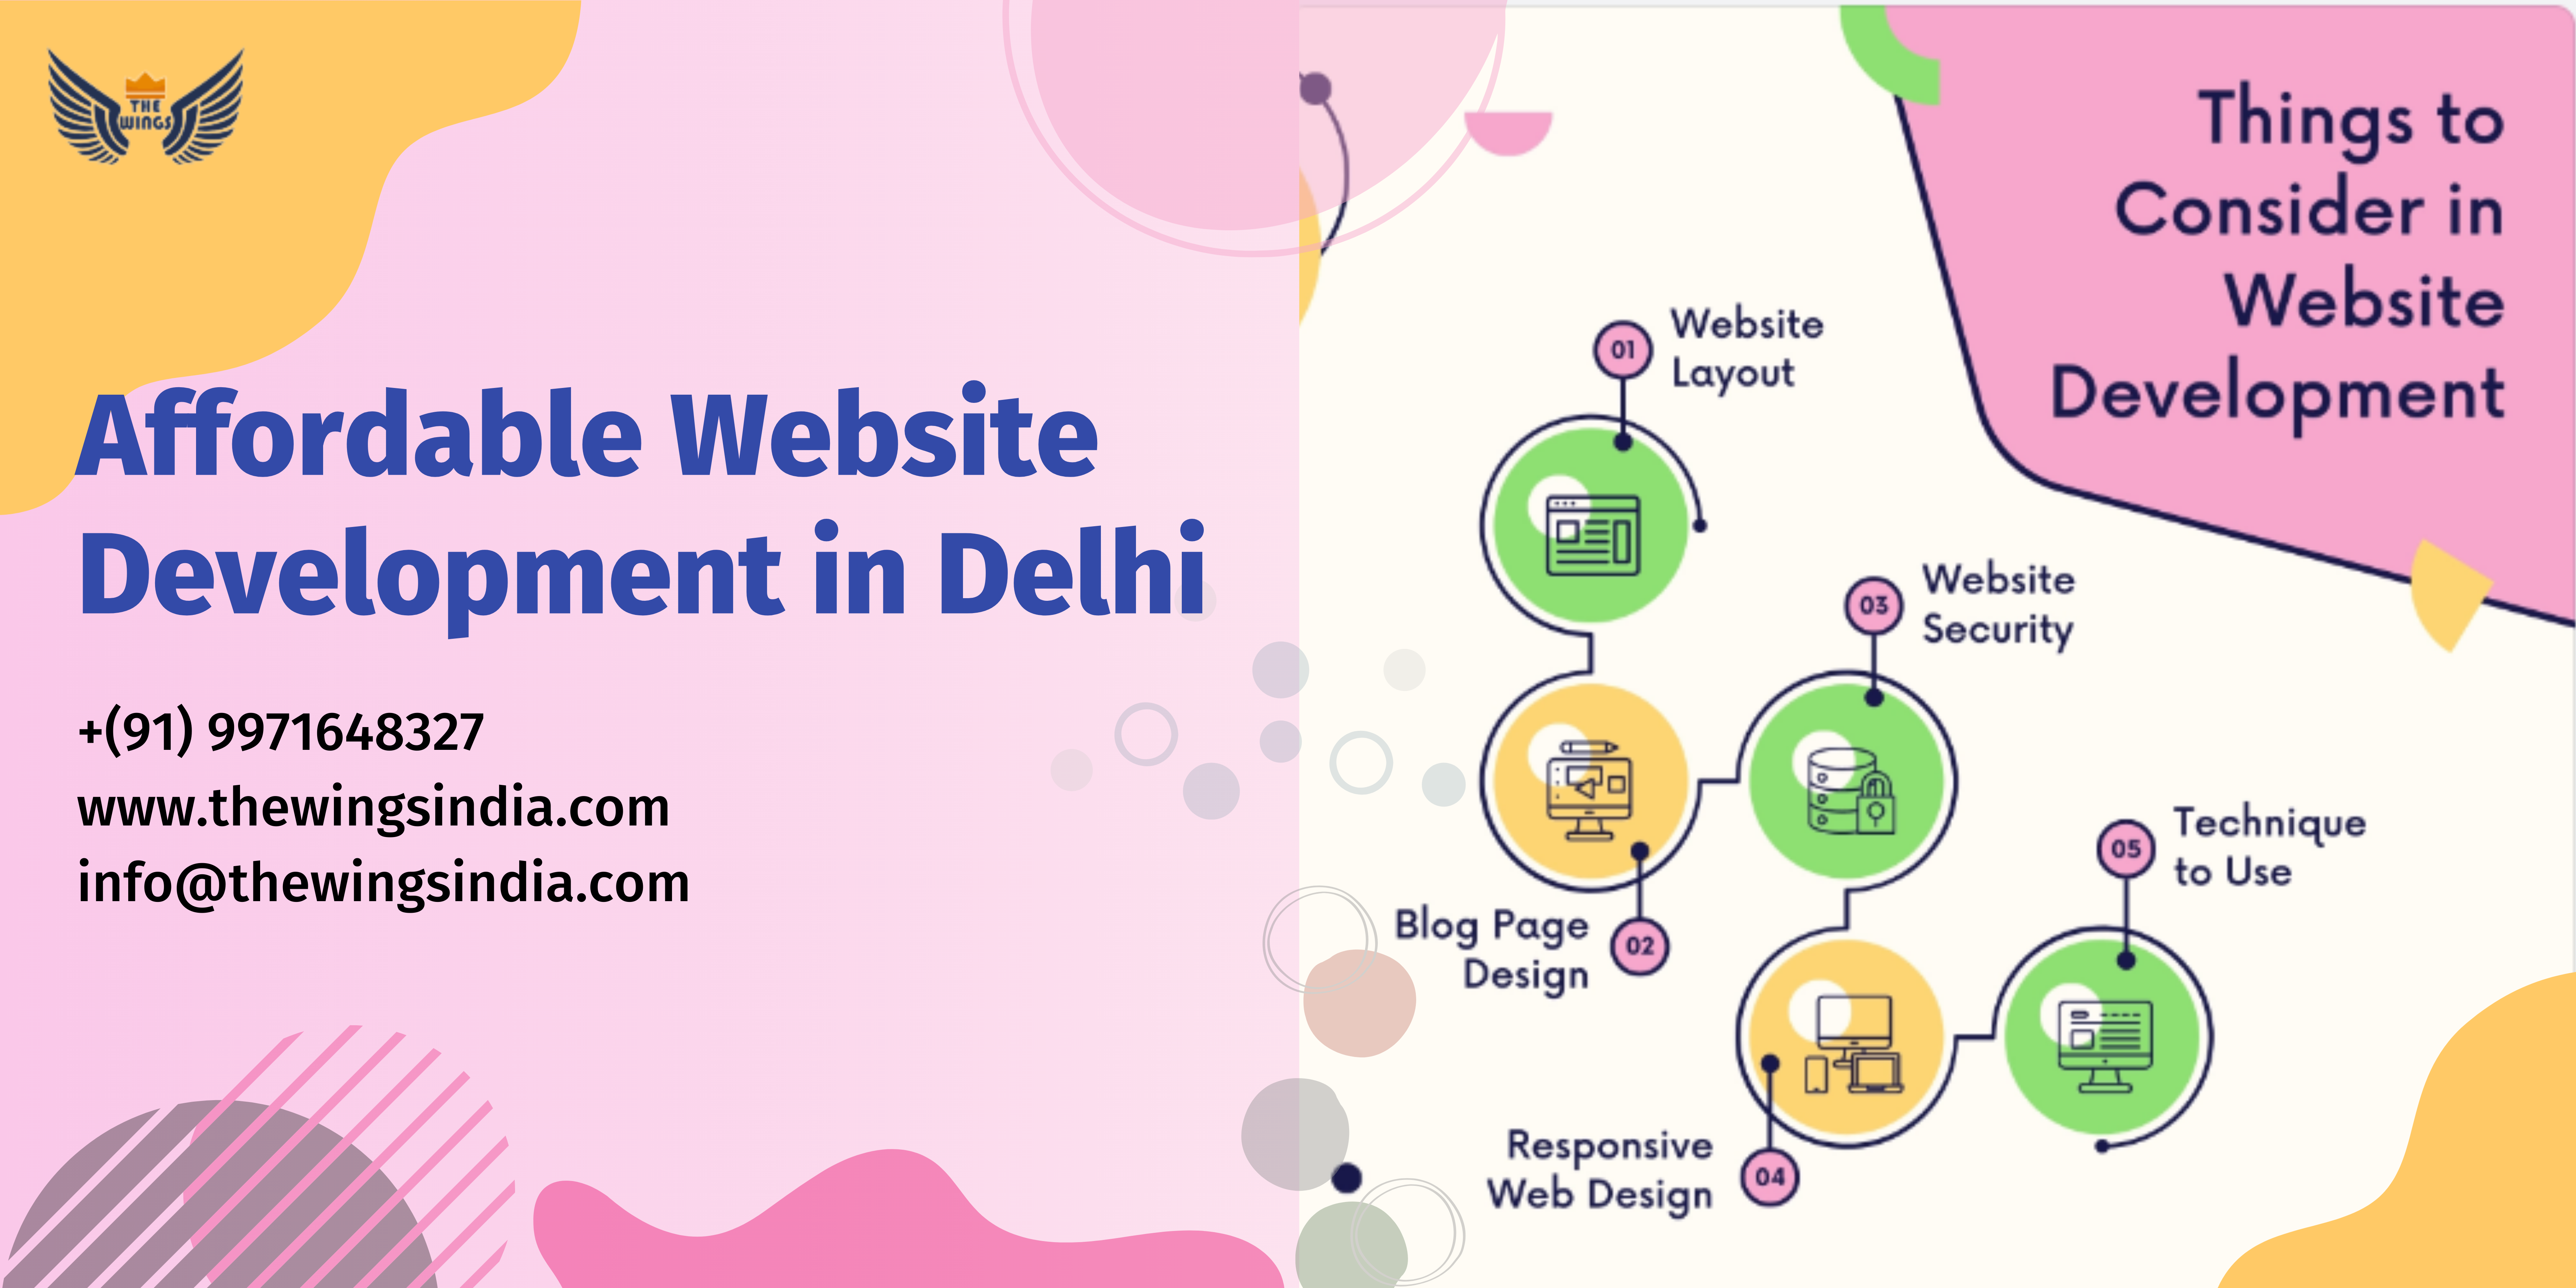 Affordable Website Development in Delhi: Your Path to a Budget-Friendly Online Presence